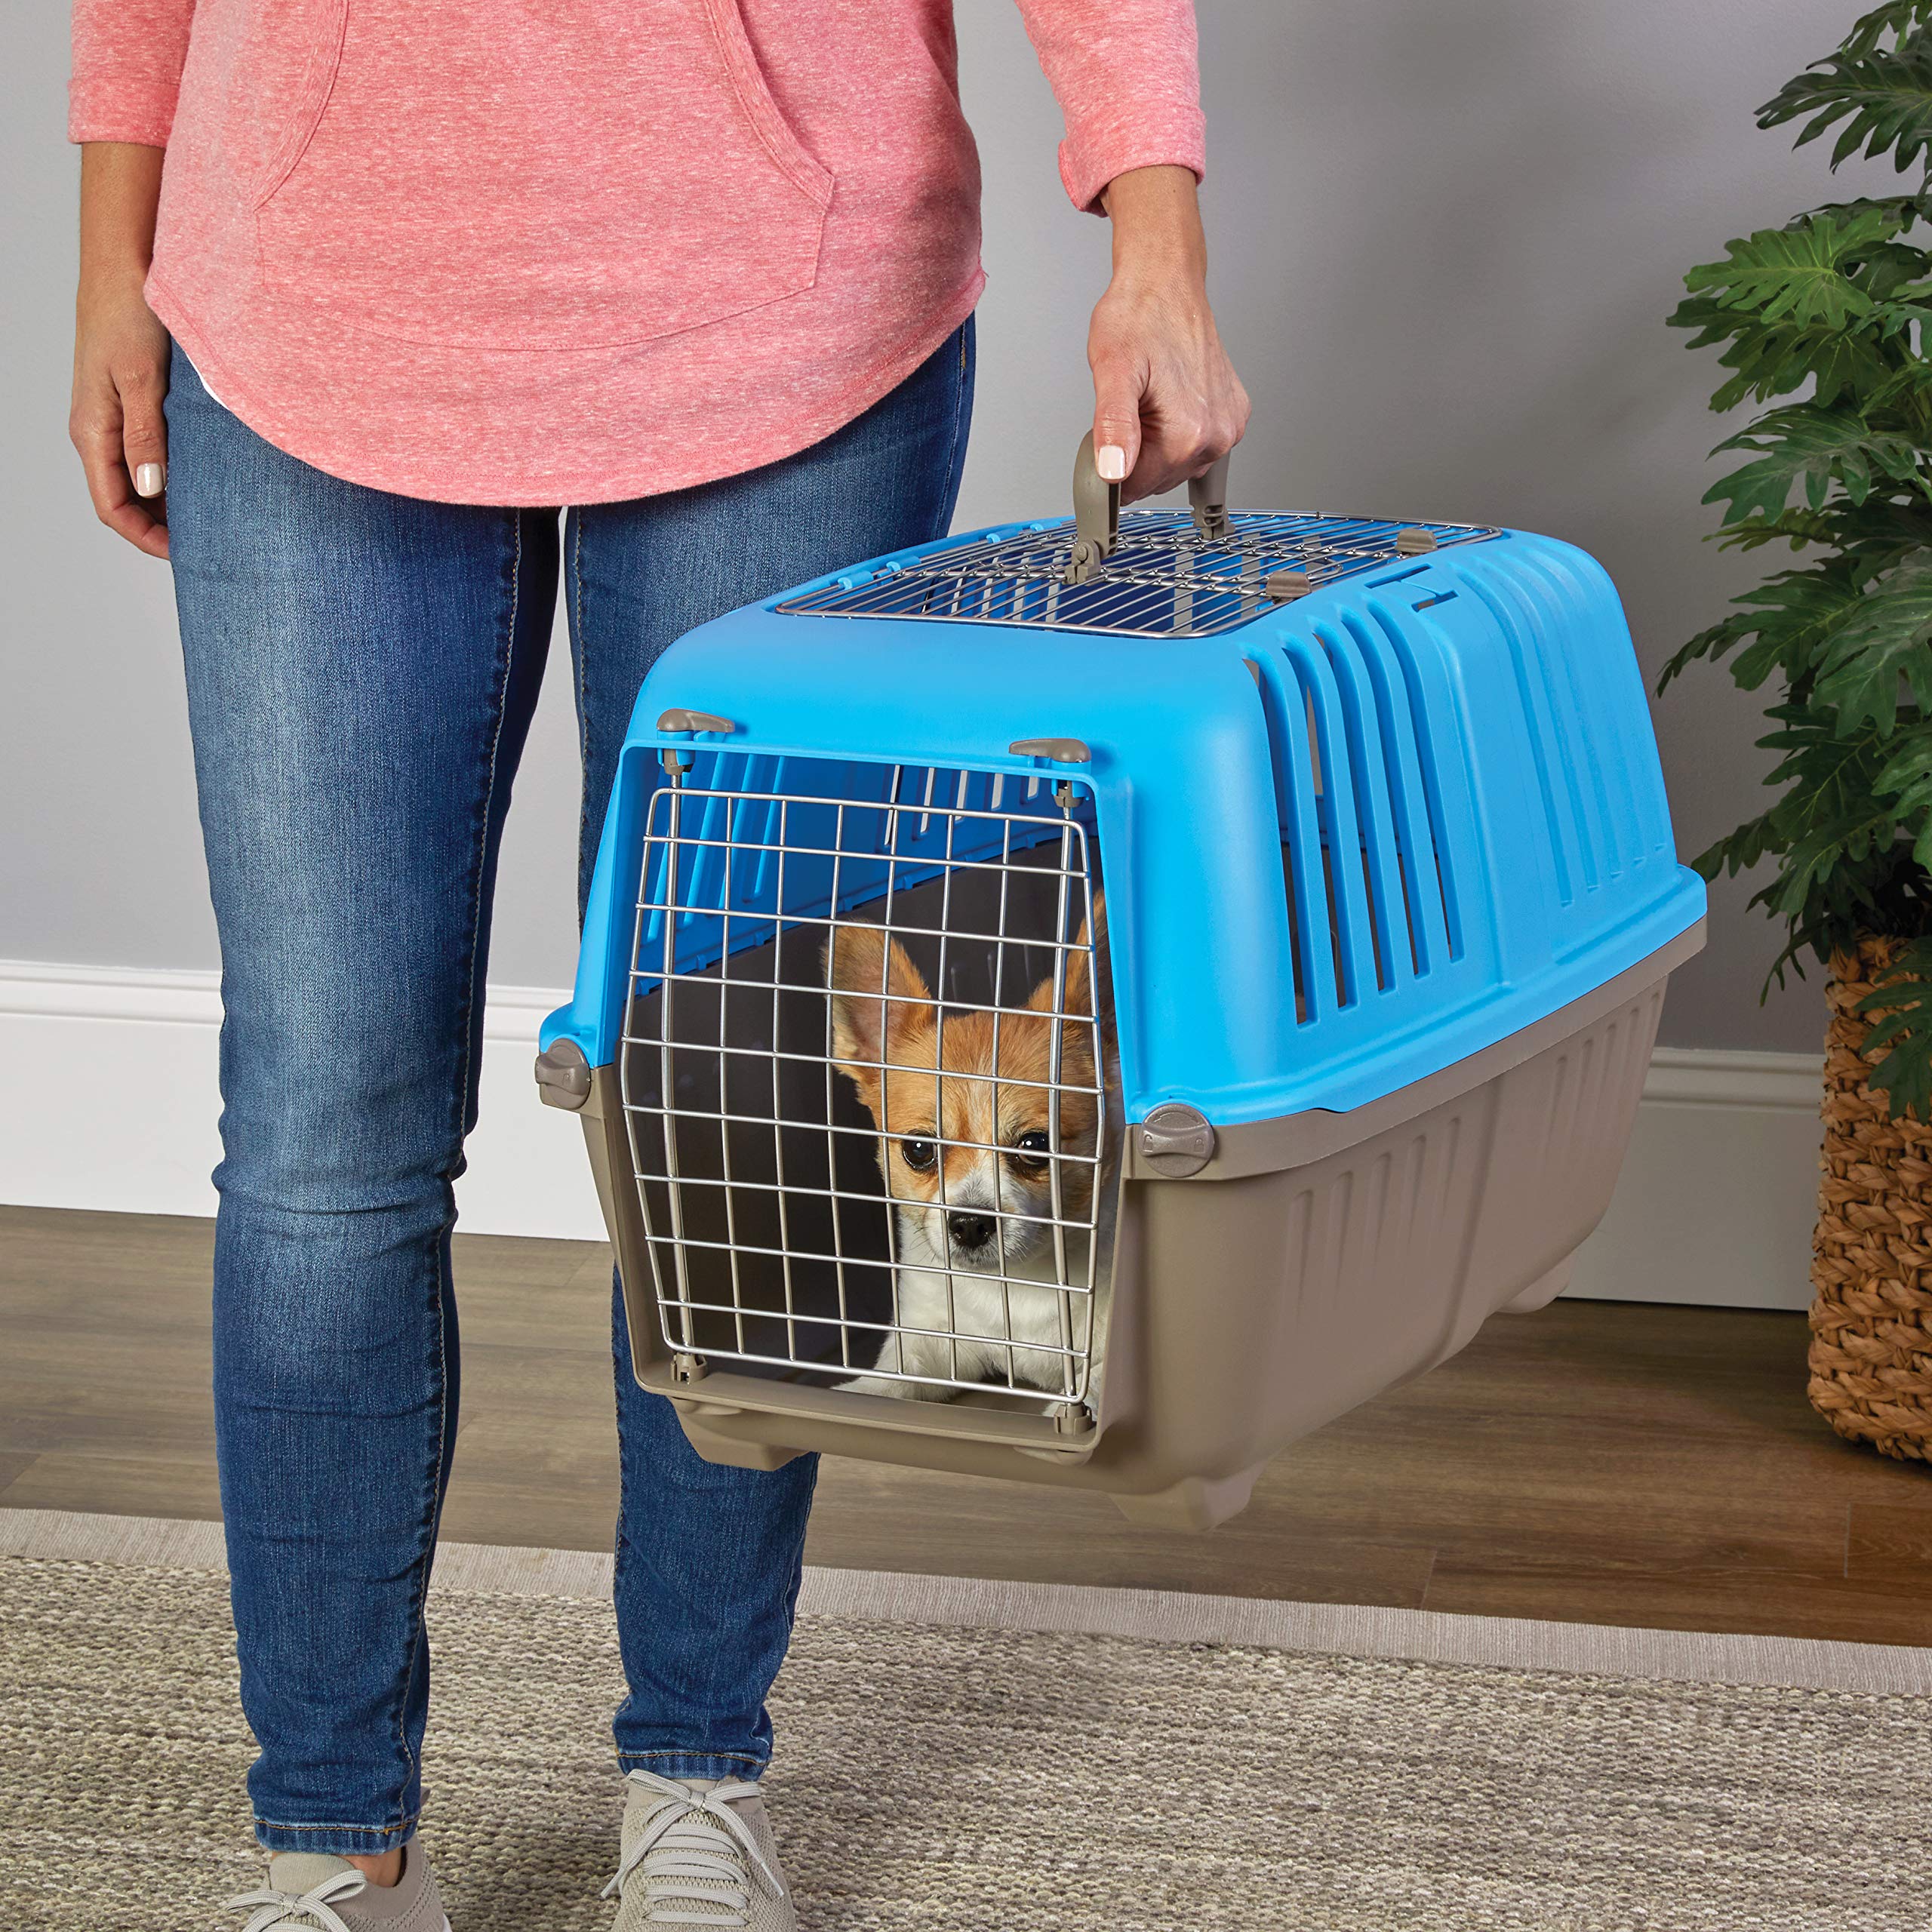 Midwest Spree Top Loading Double Door Travel Dog Kennel Carrier - Blue - 24" X 15.5" X 15" Inches  